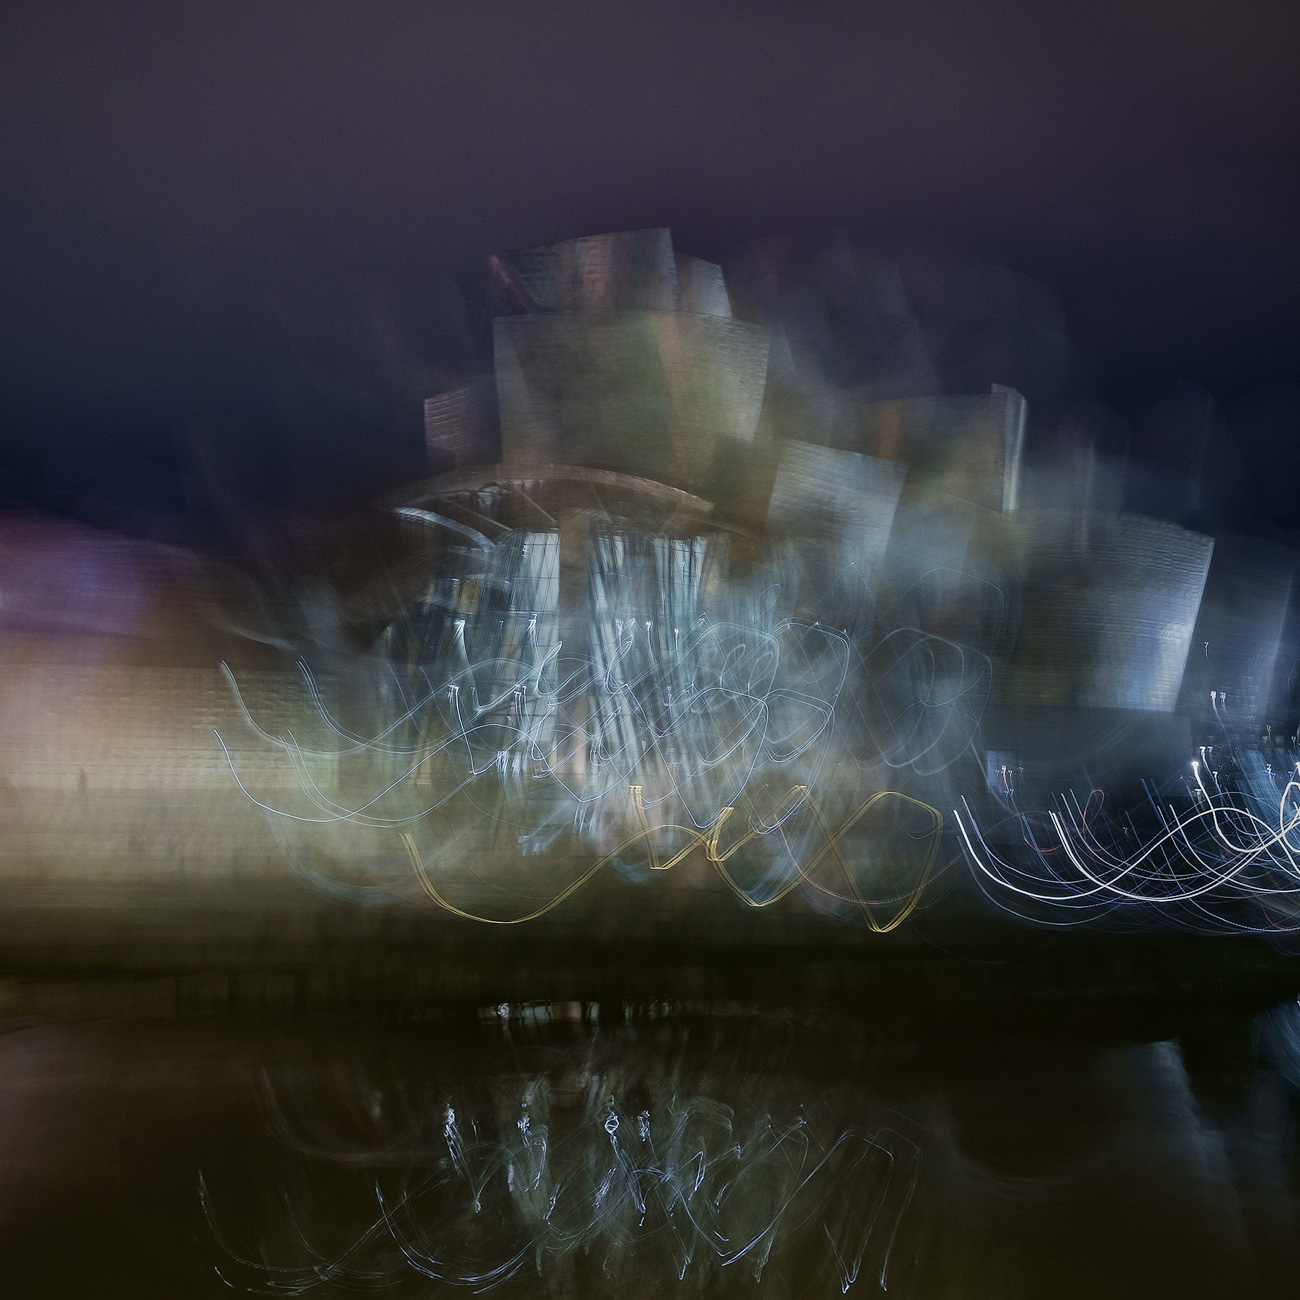 Mad hatters - ICM (intentional camera movement) and double exposure